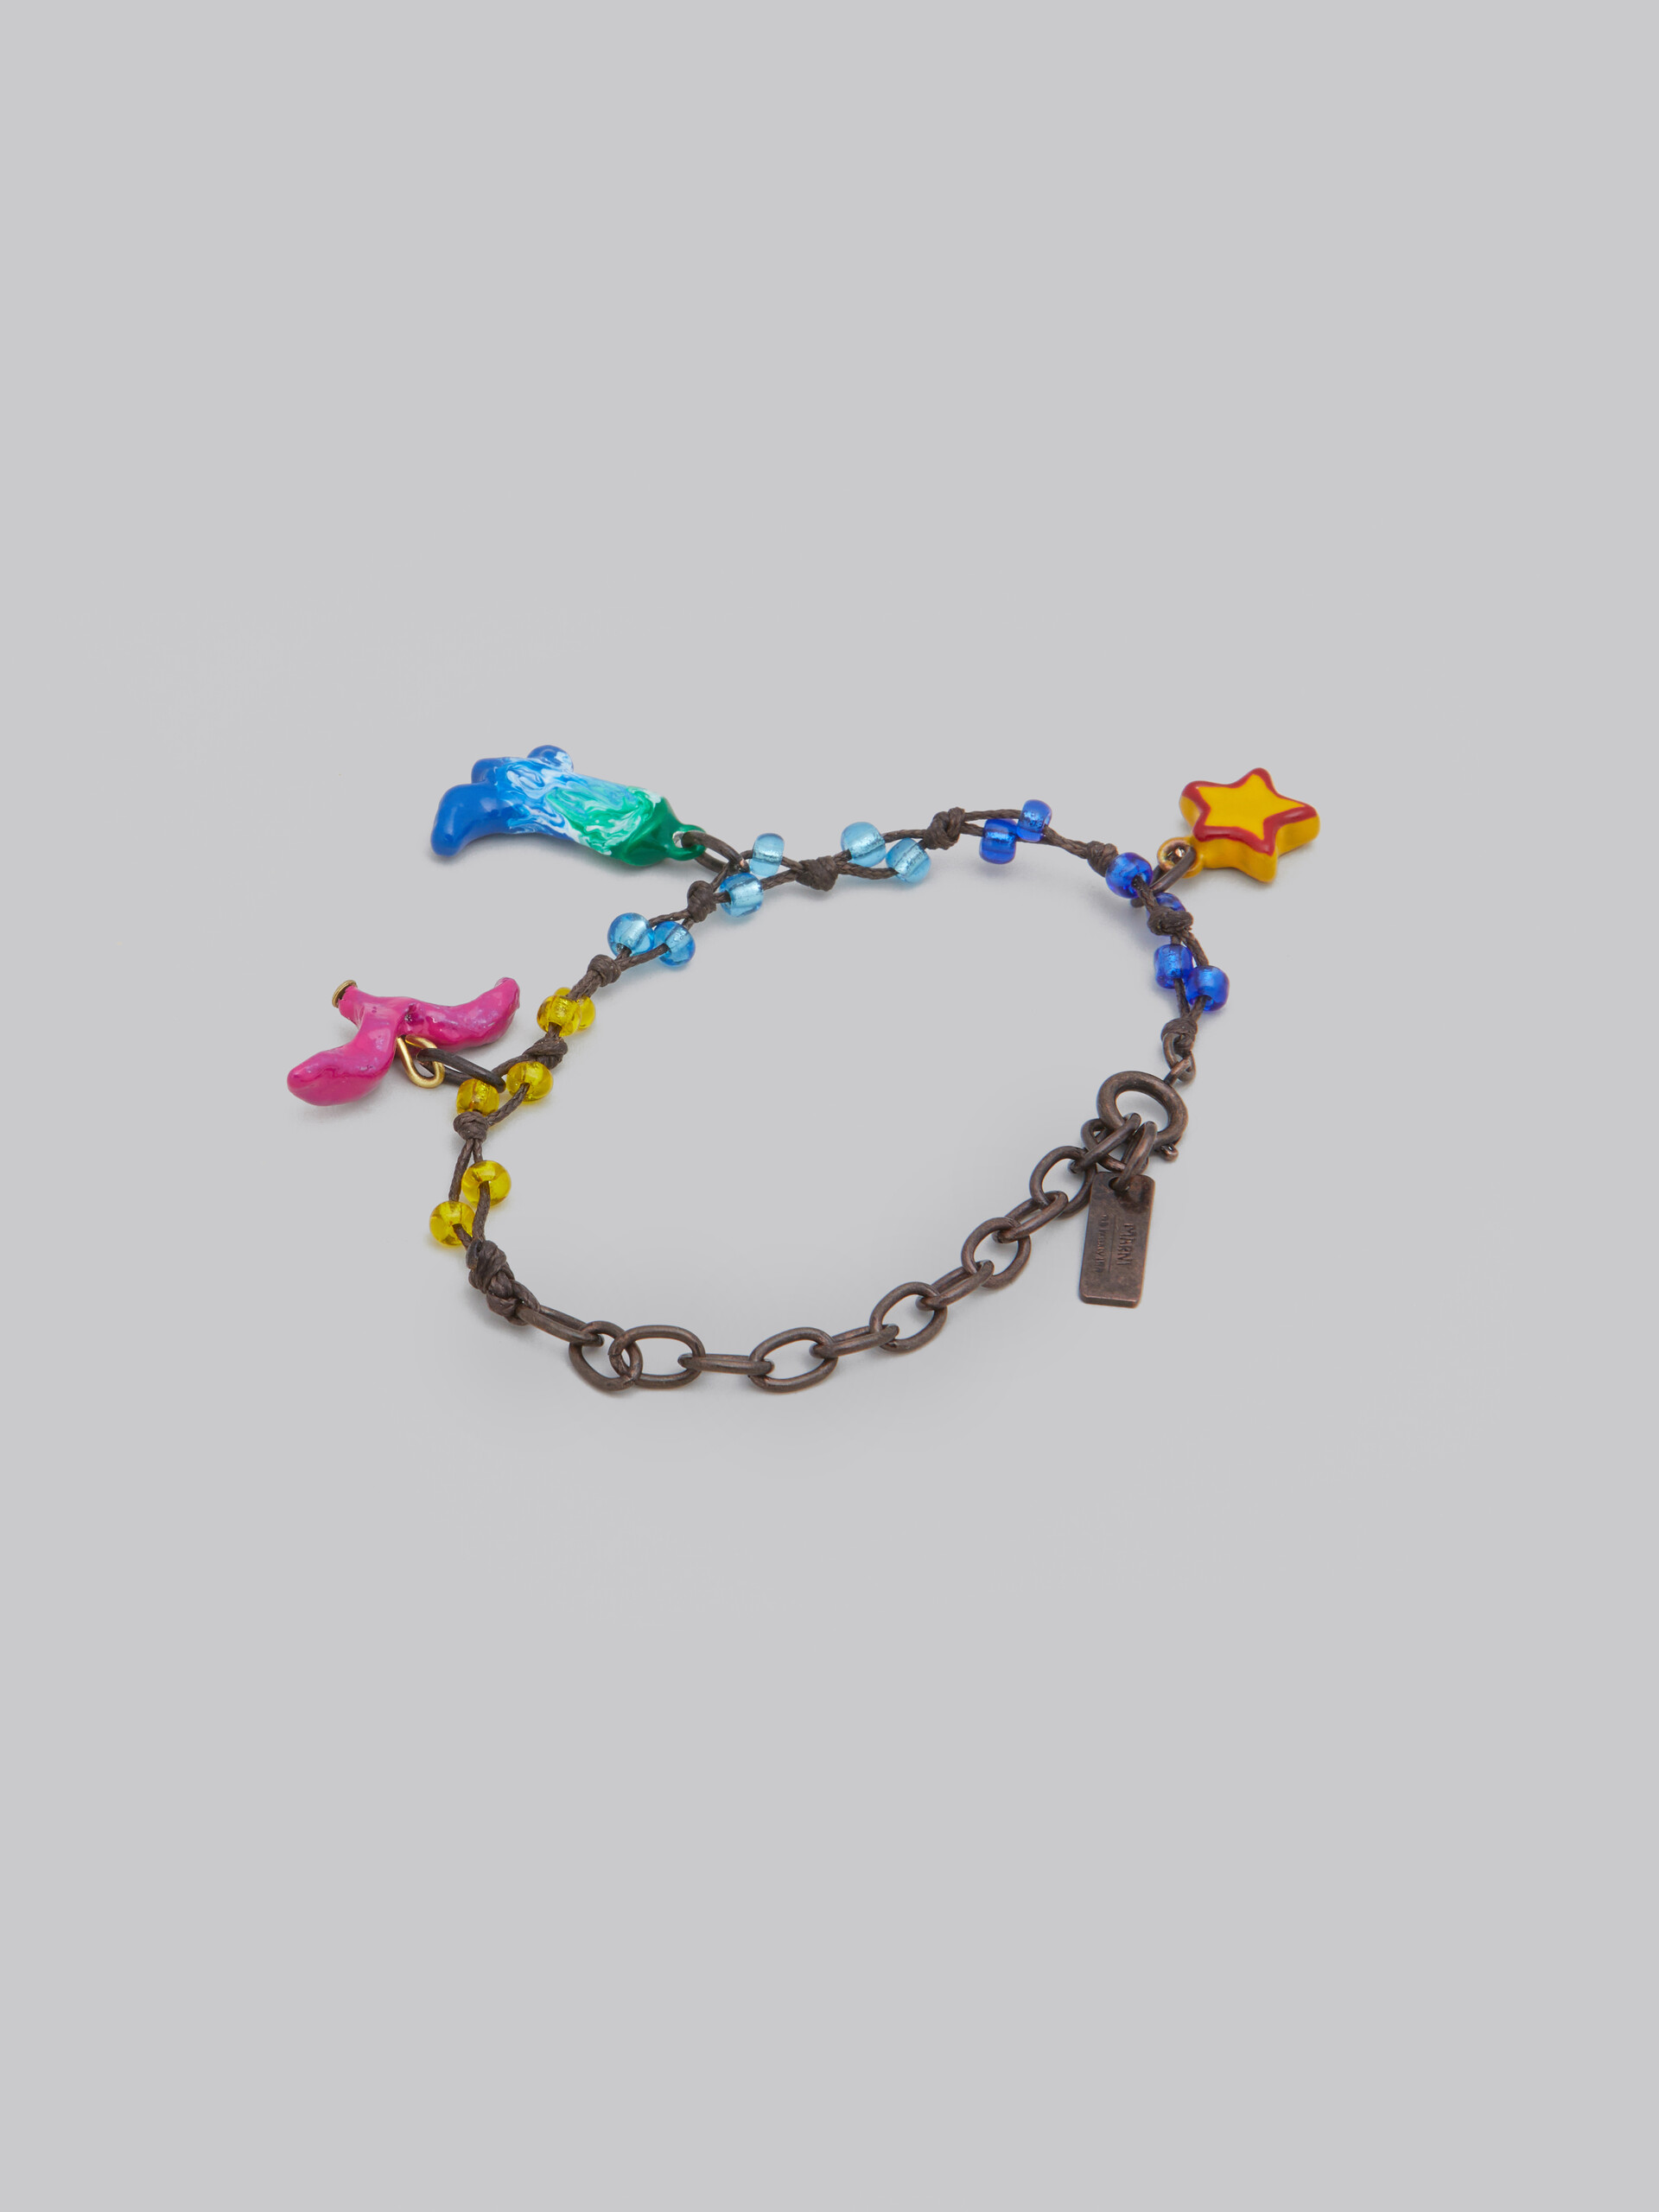 Marni x No Vacancy Inn - Bracelet with red blue and yellow pendants - Bracelets - Image 3